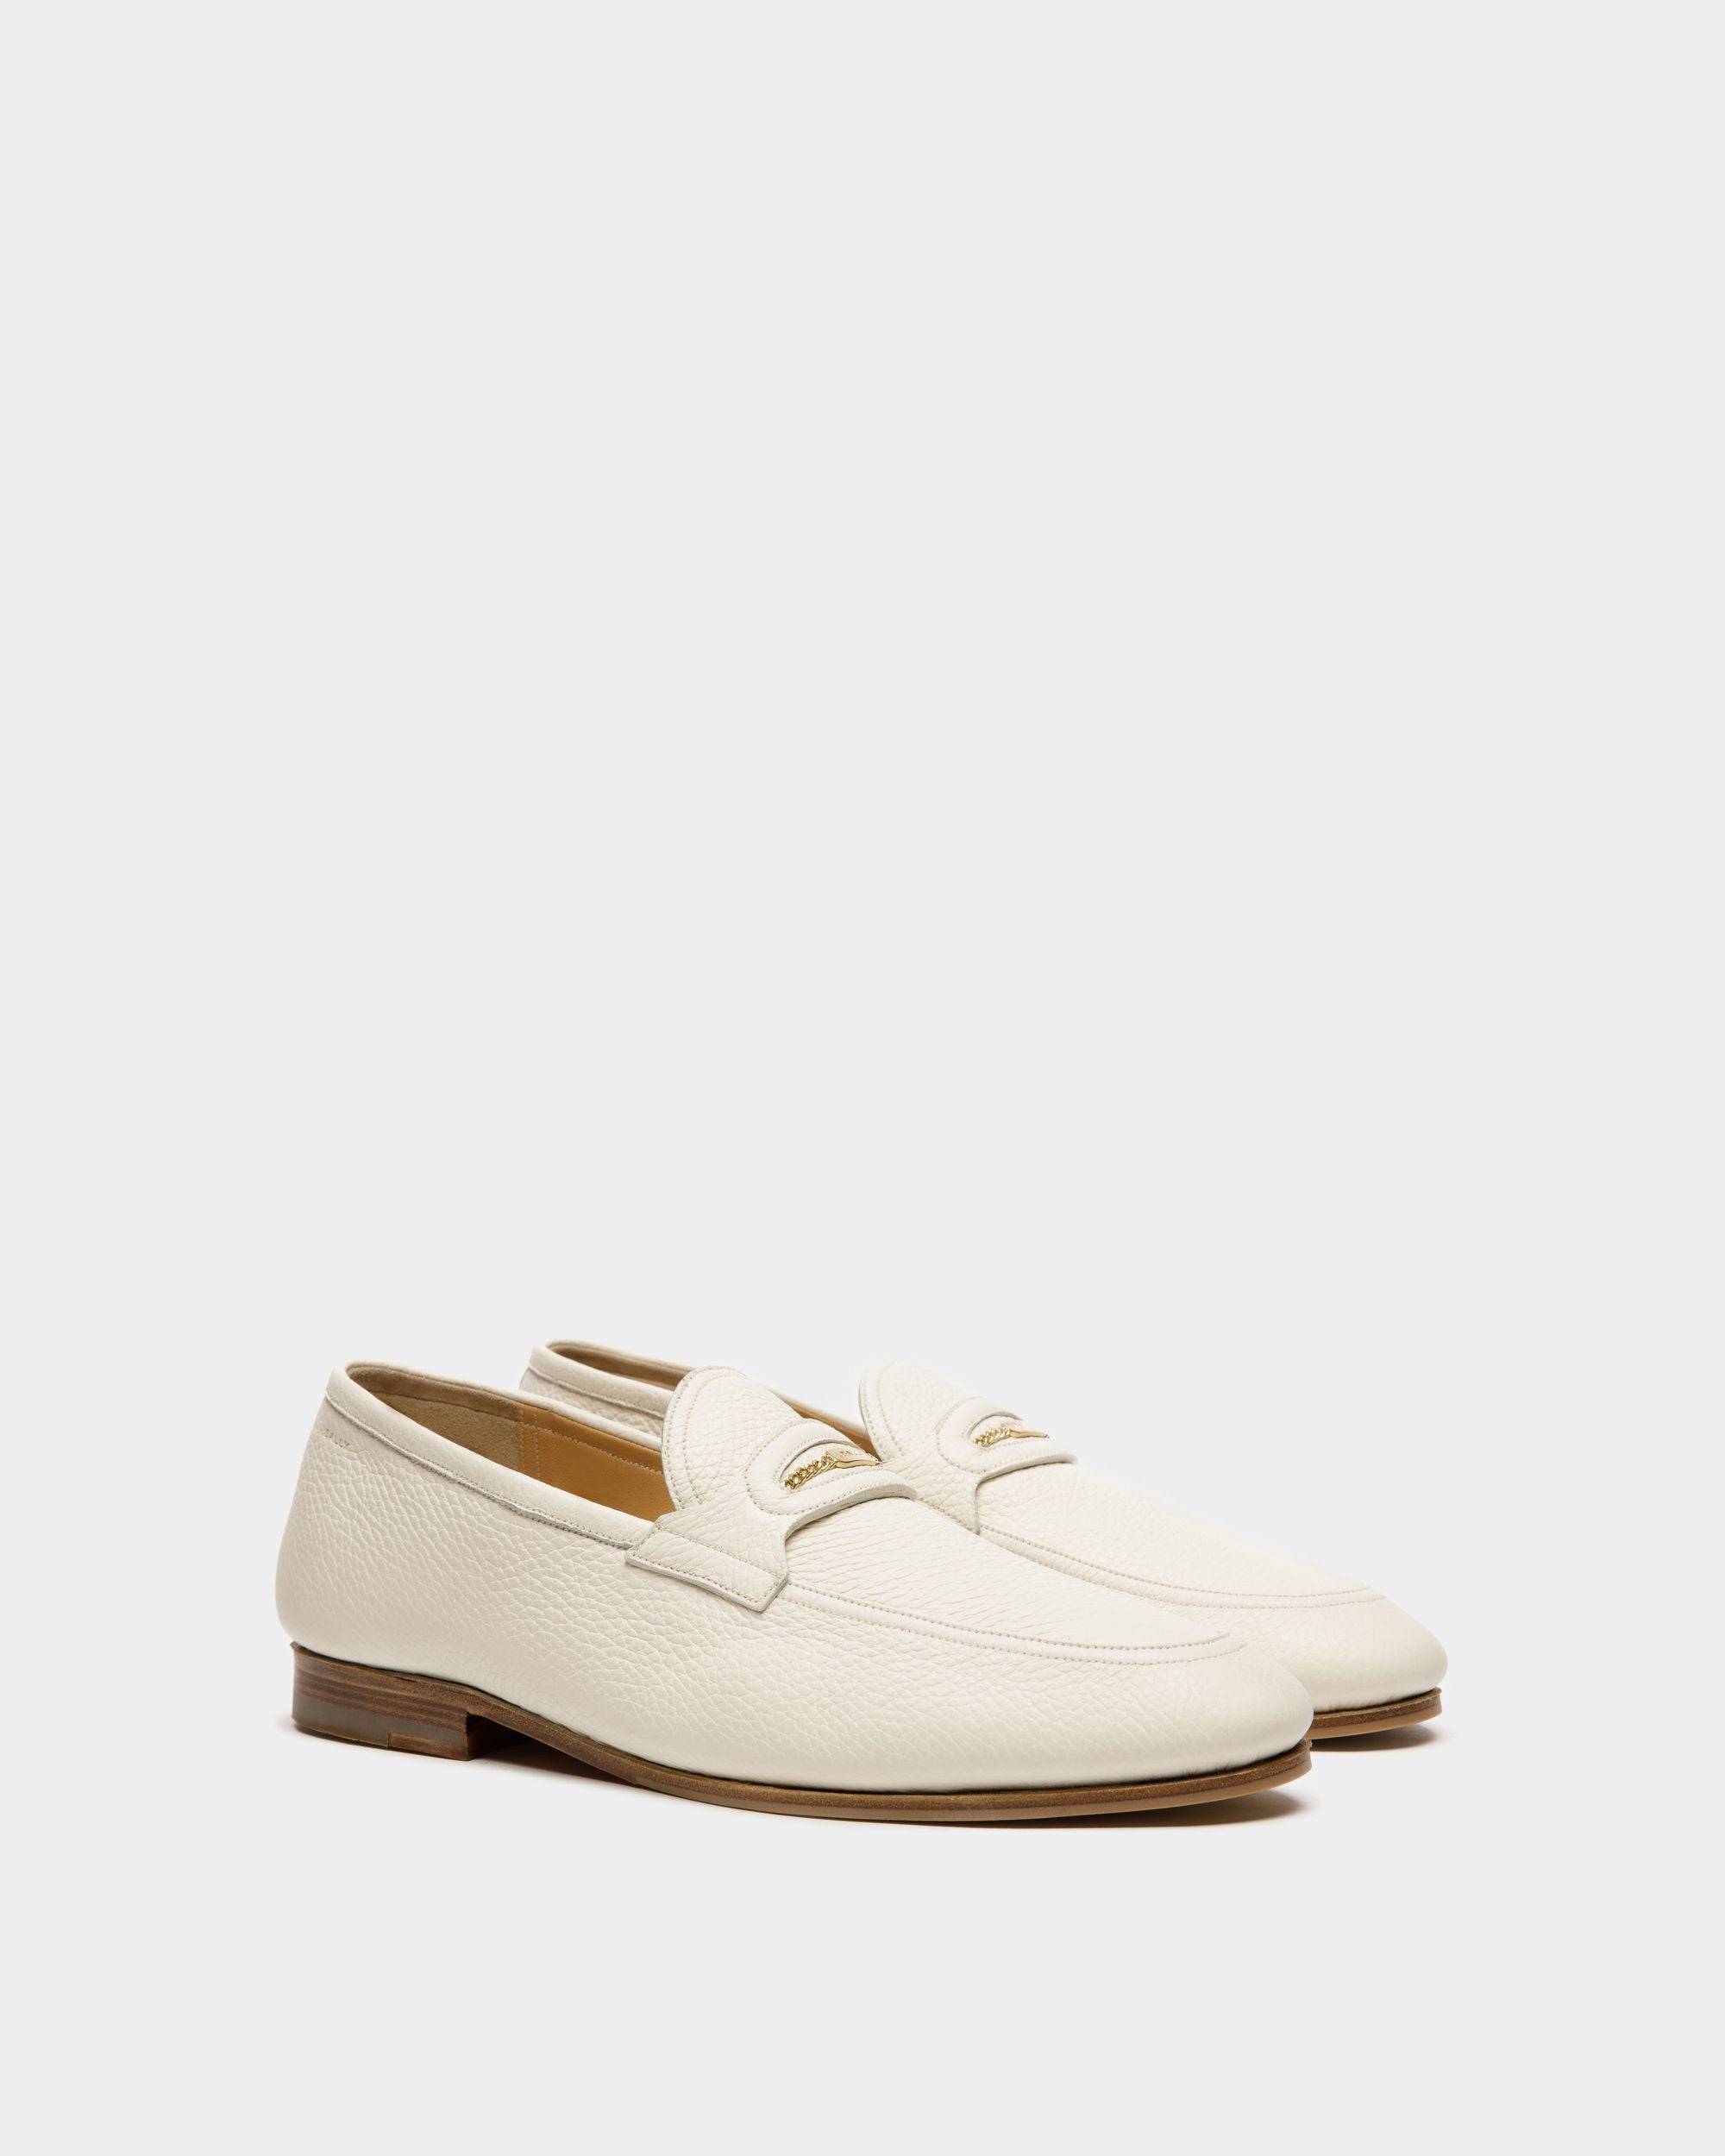 Pesek | Men's Loafers | White Leather | Bally | Still Life 3/4 Front